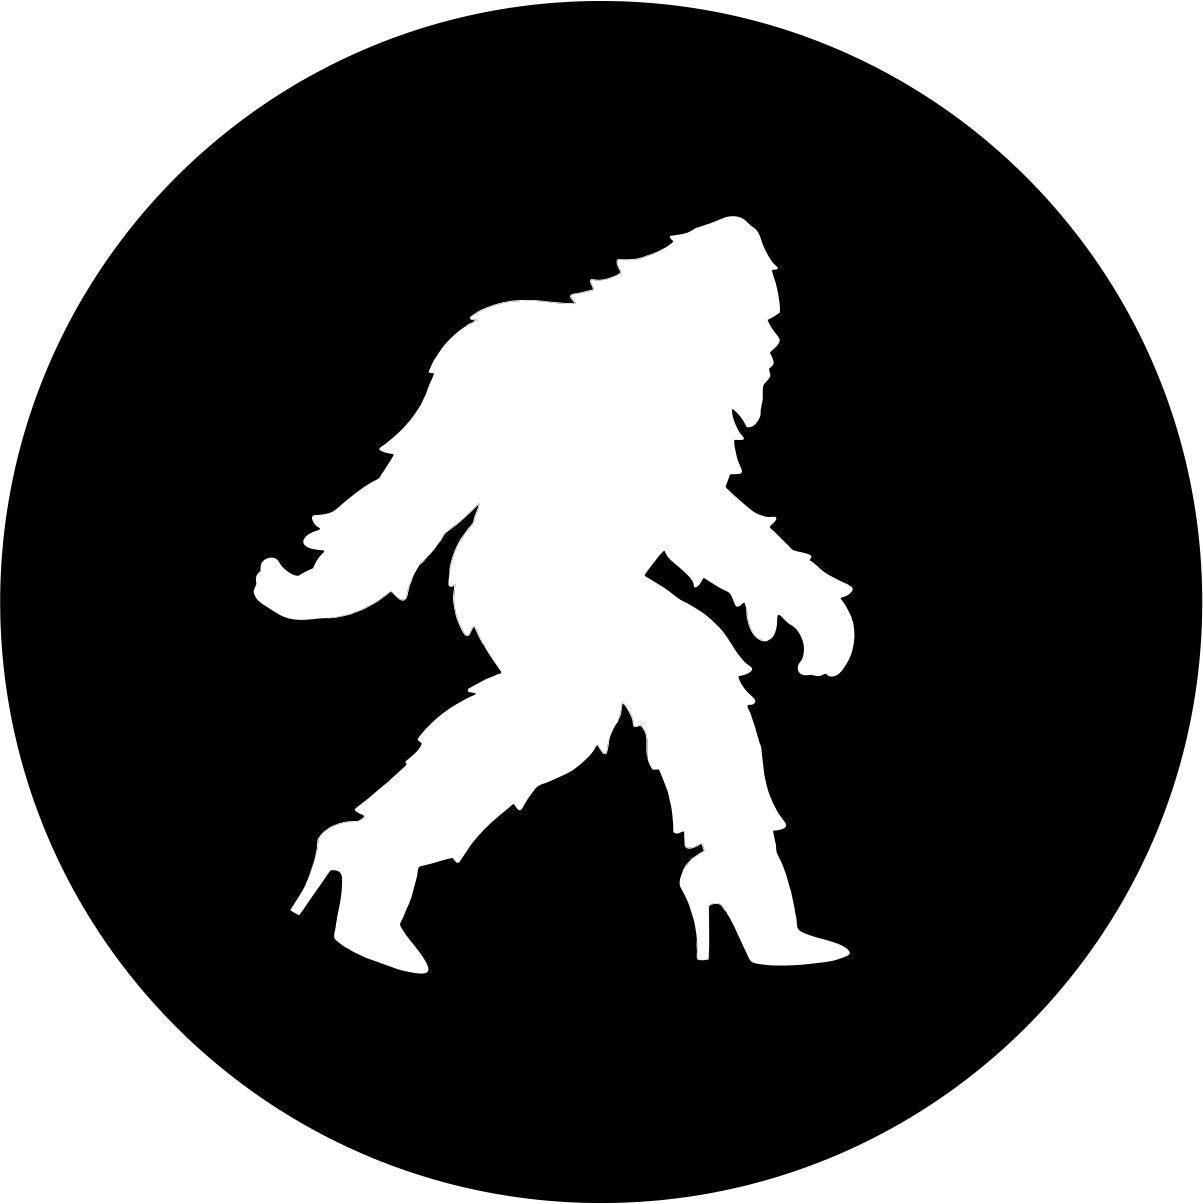 Black Vinyl Spare Tire Cover With A Silhouette Of A Bigfoot Shesquatch in high heels Walking Across The Center.